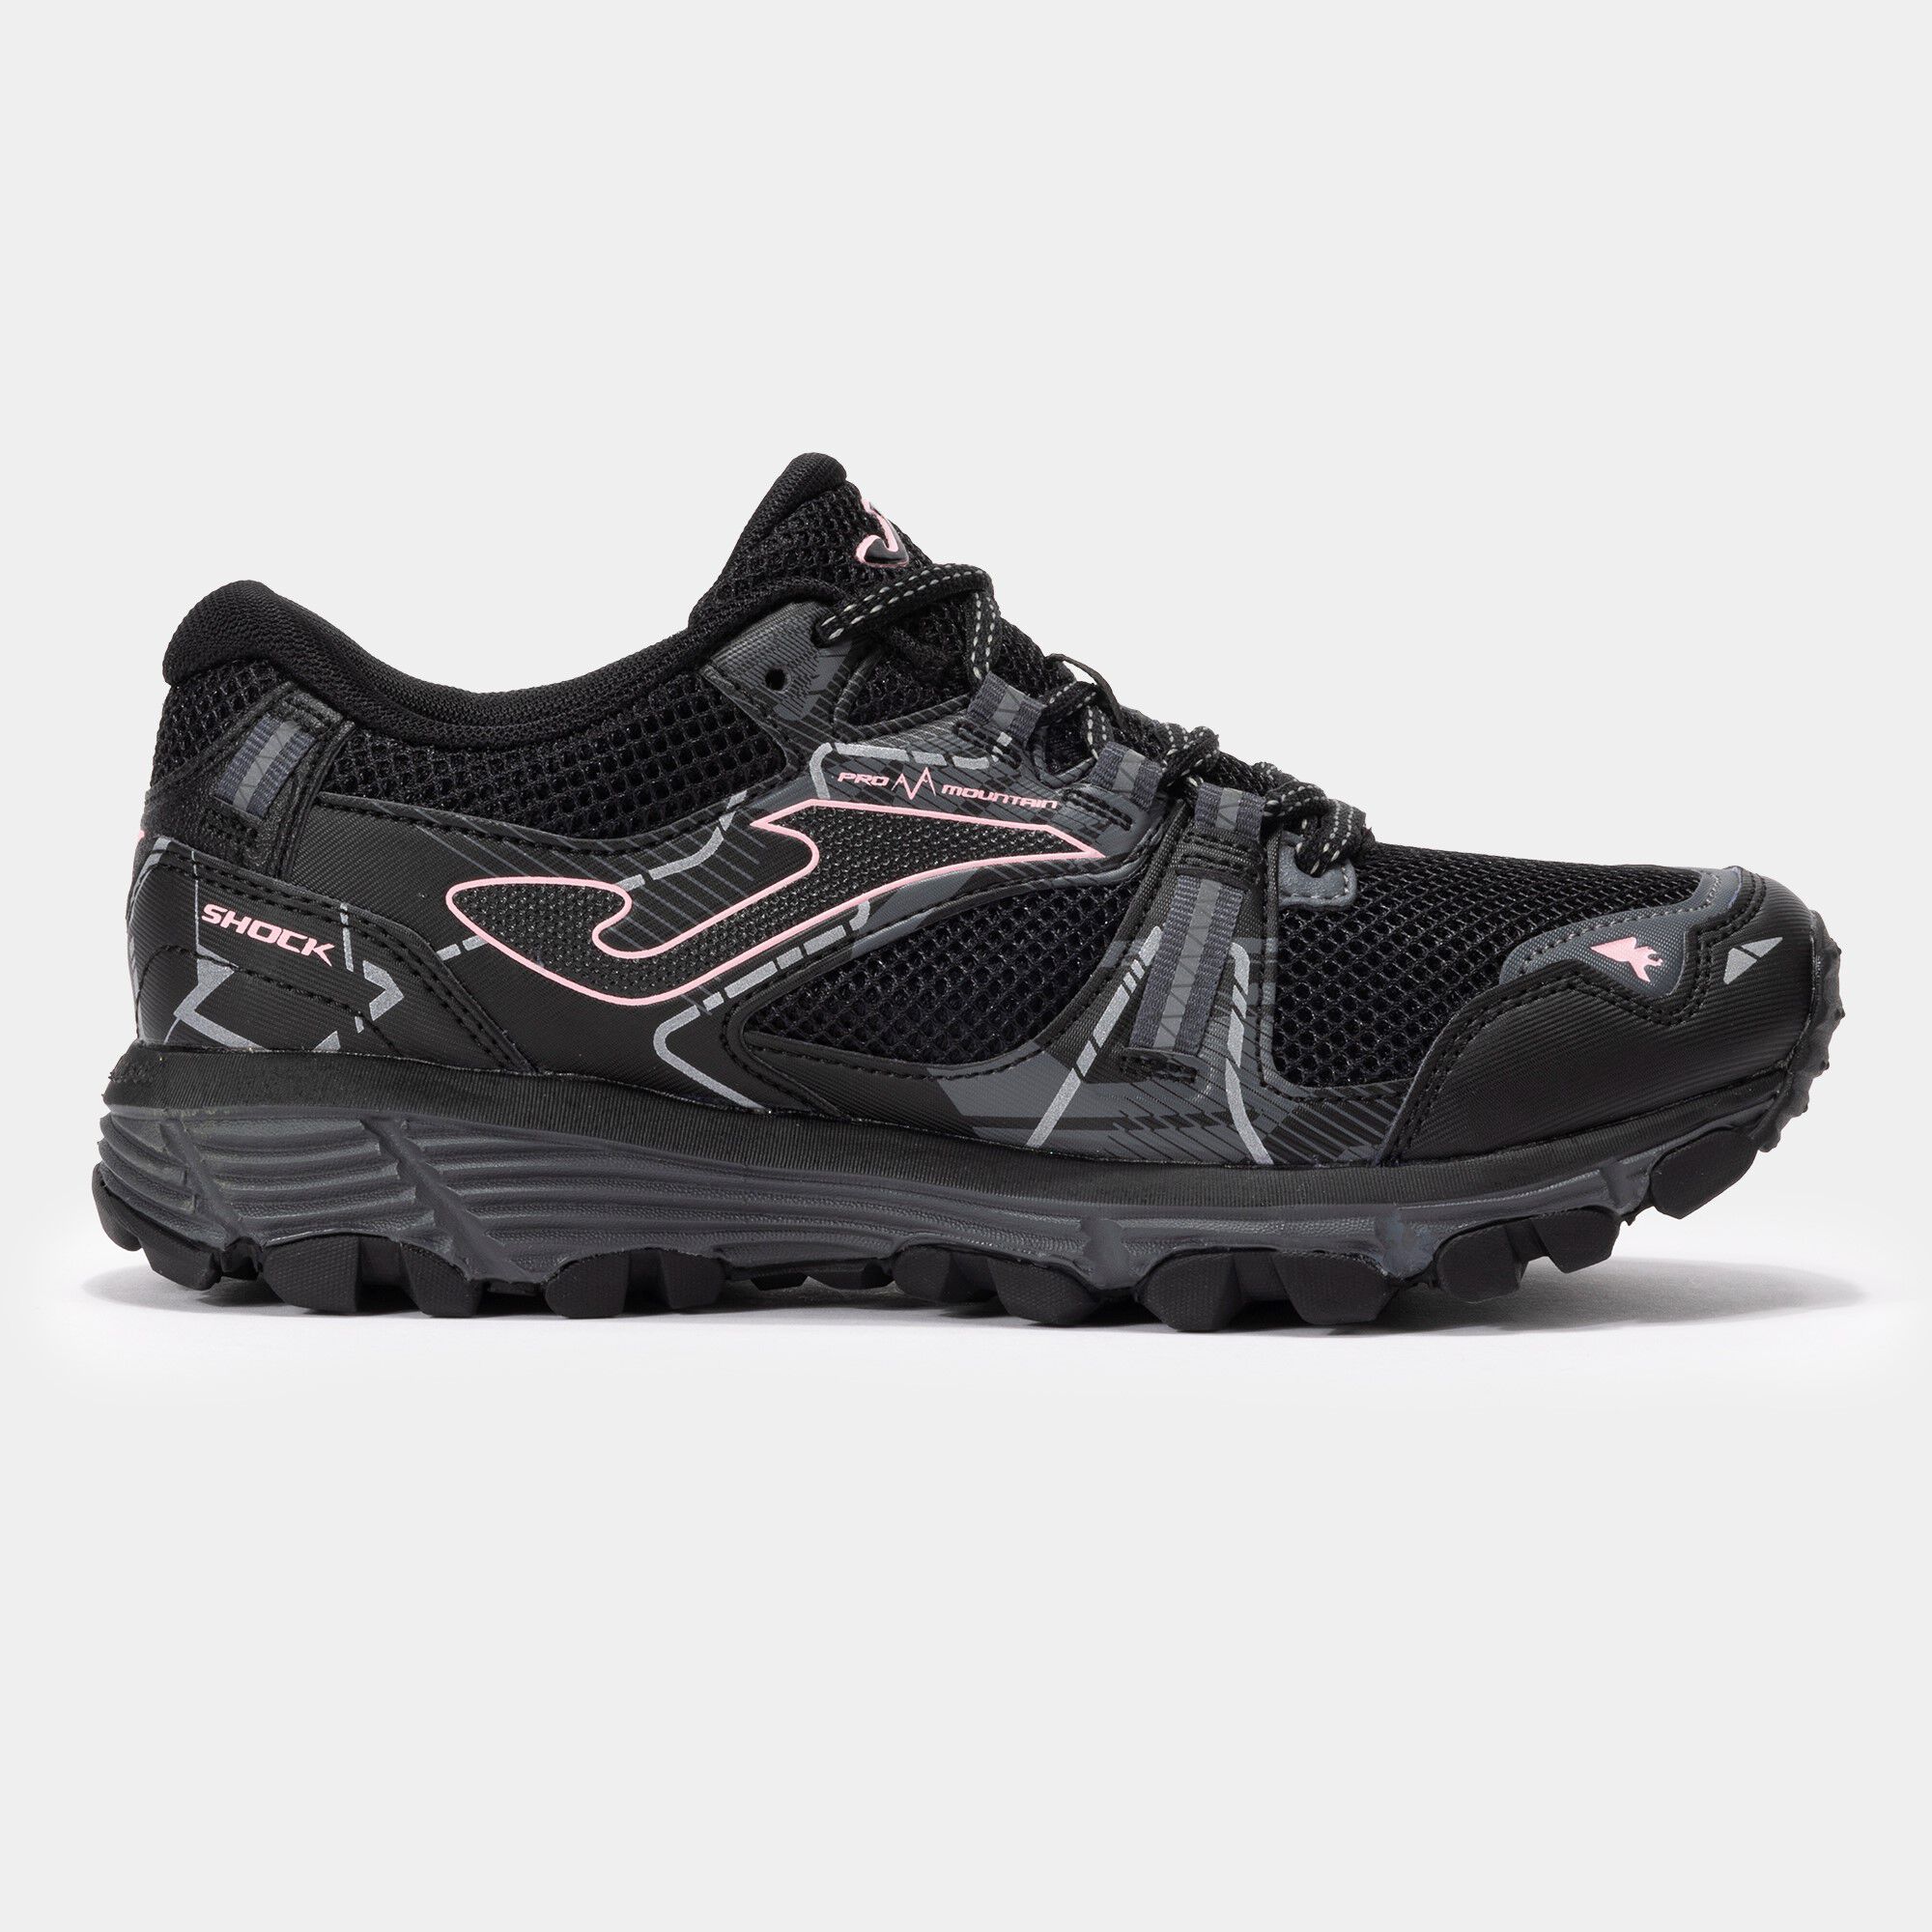 Trail-running shoes Shock Lady 24 woman black